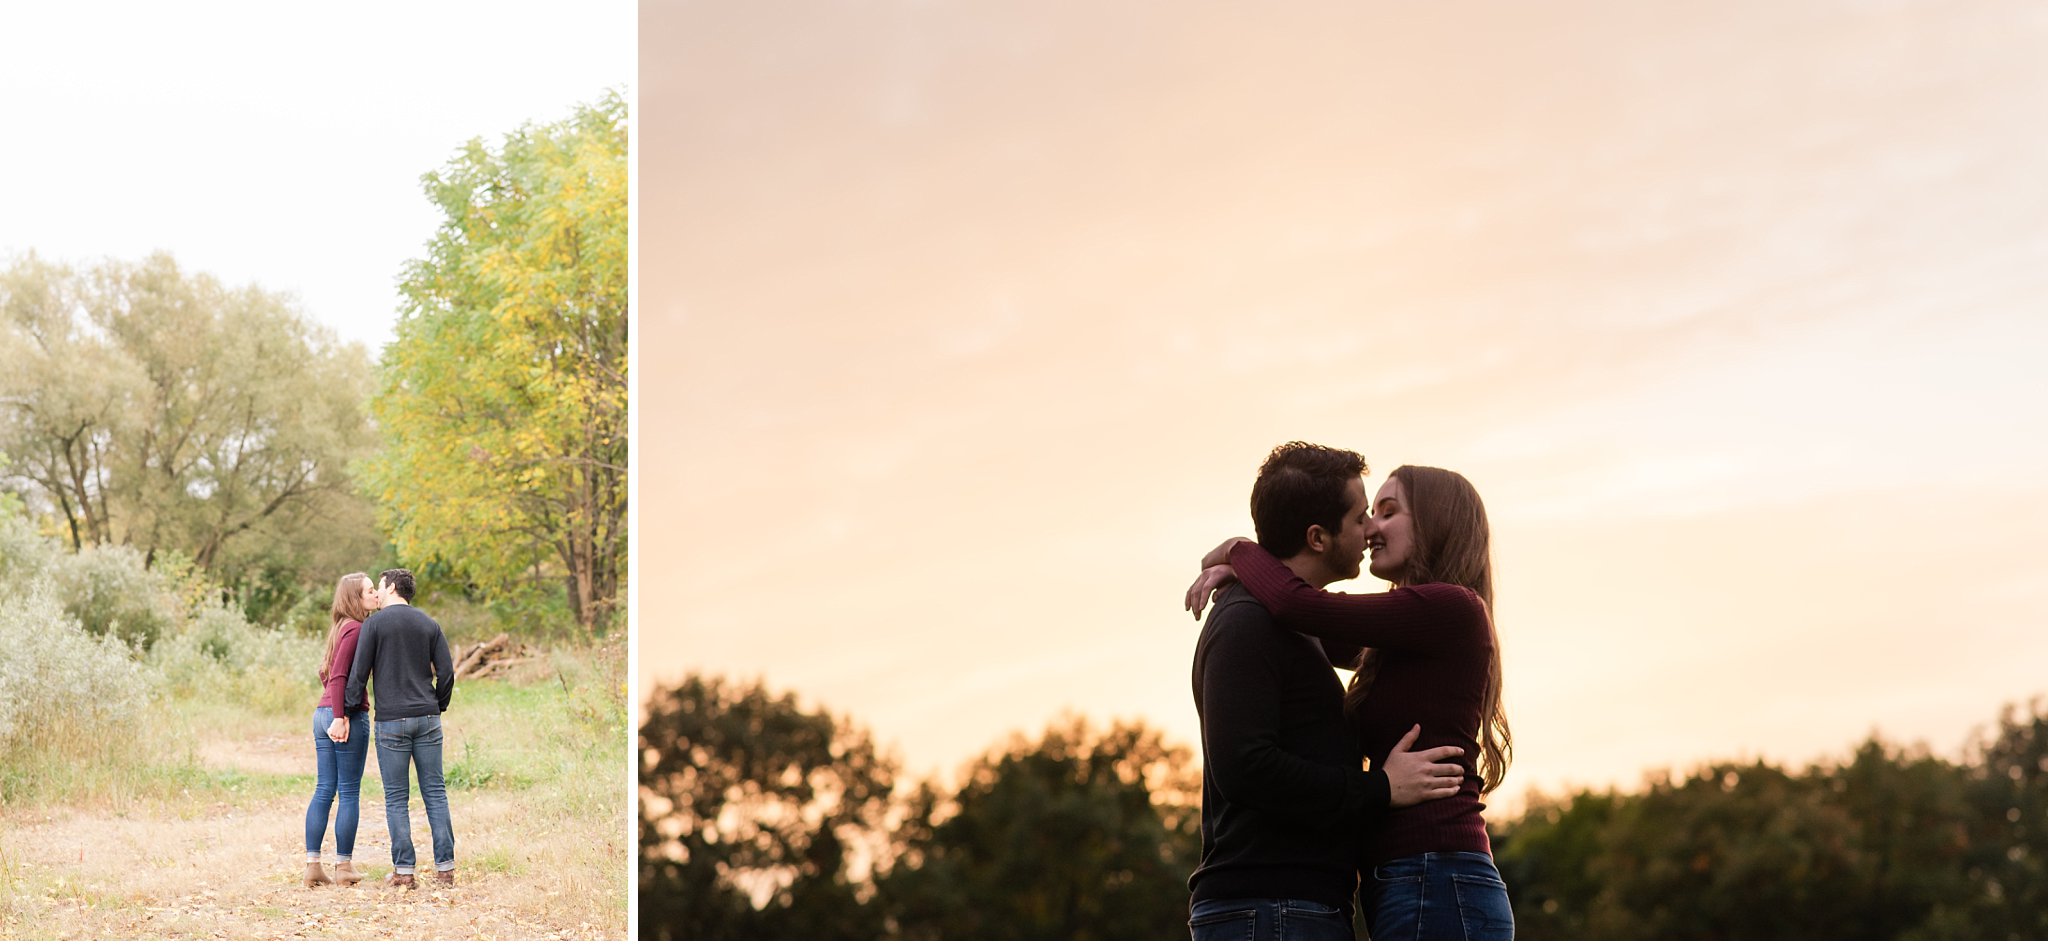 sunset at fanshawe conservation area during an engagement session